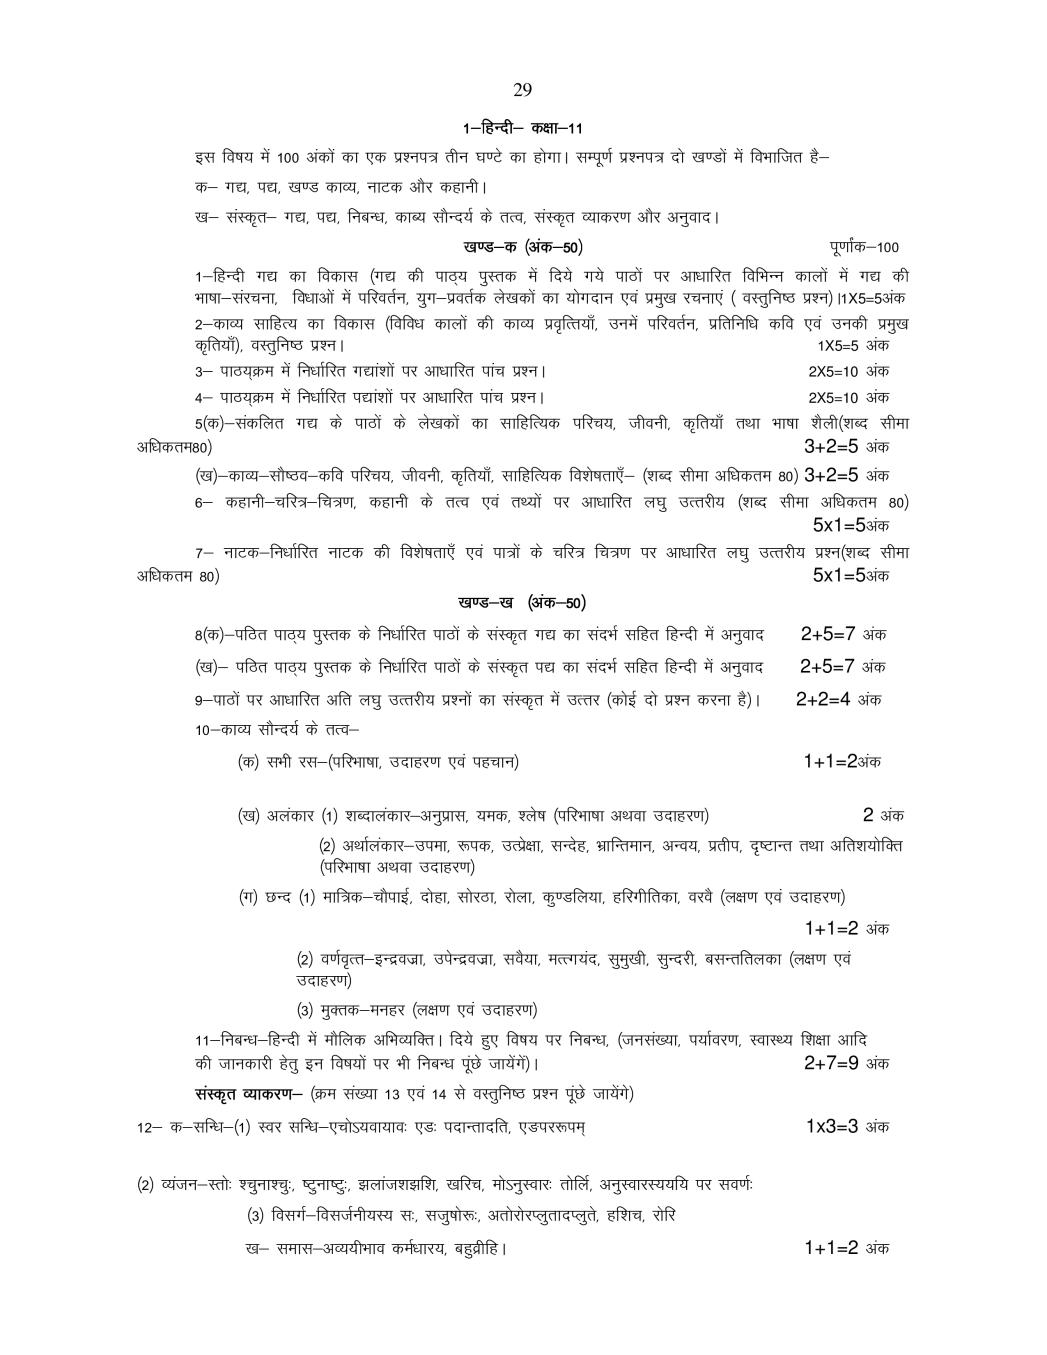 UP Board Syllabus Class 11th - Page 1